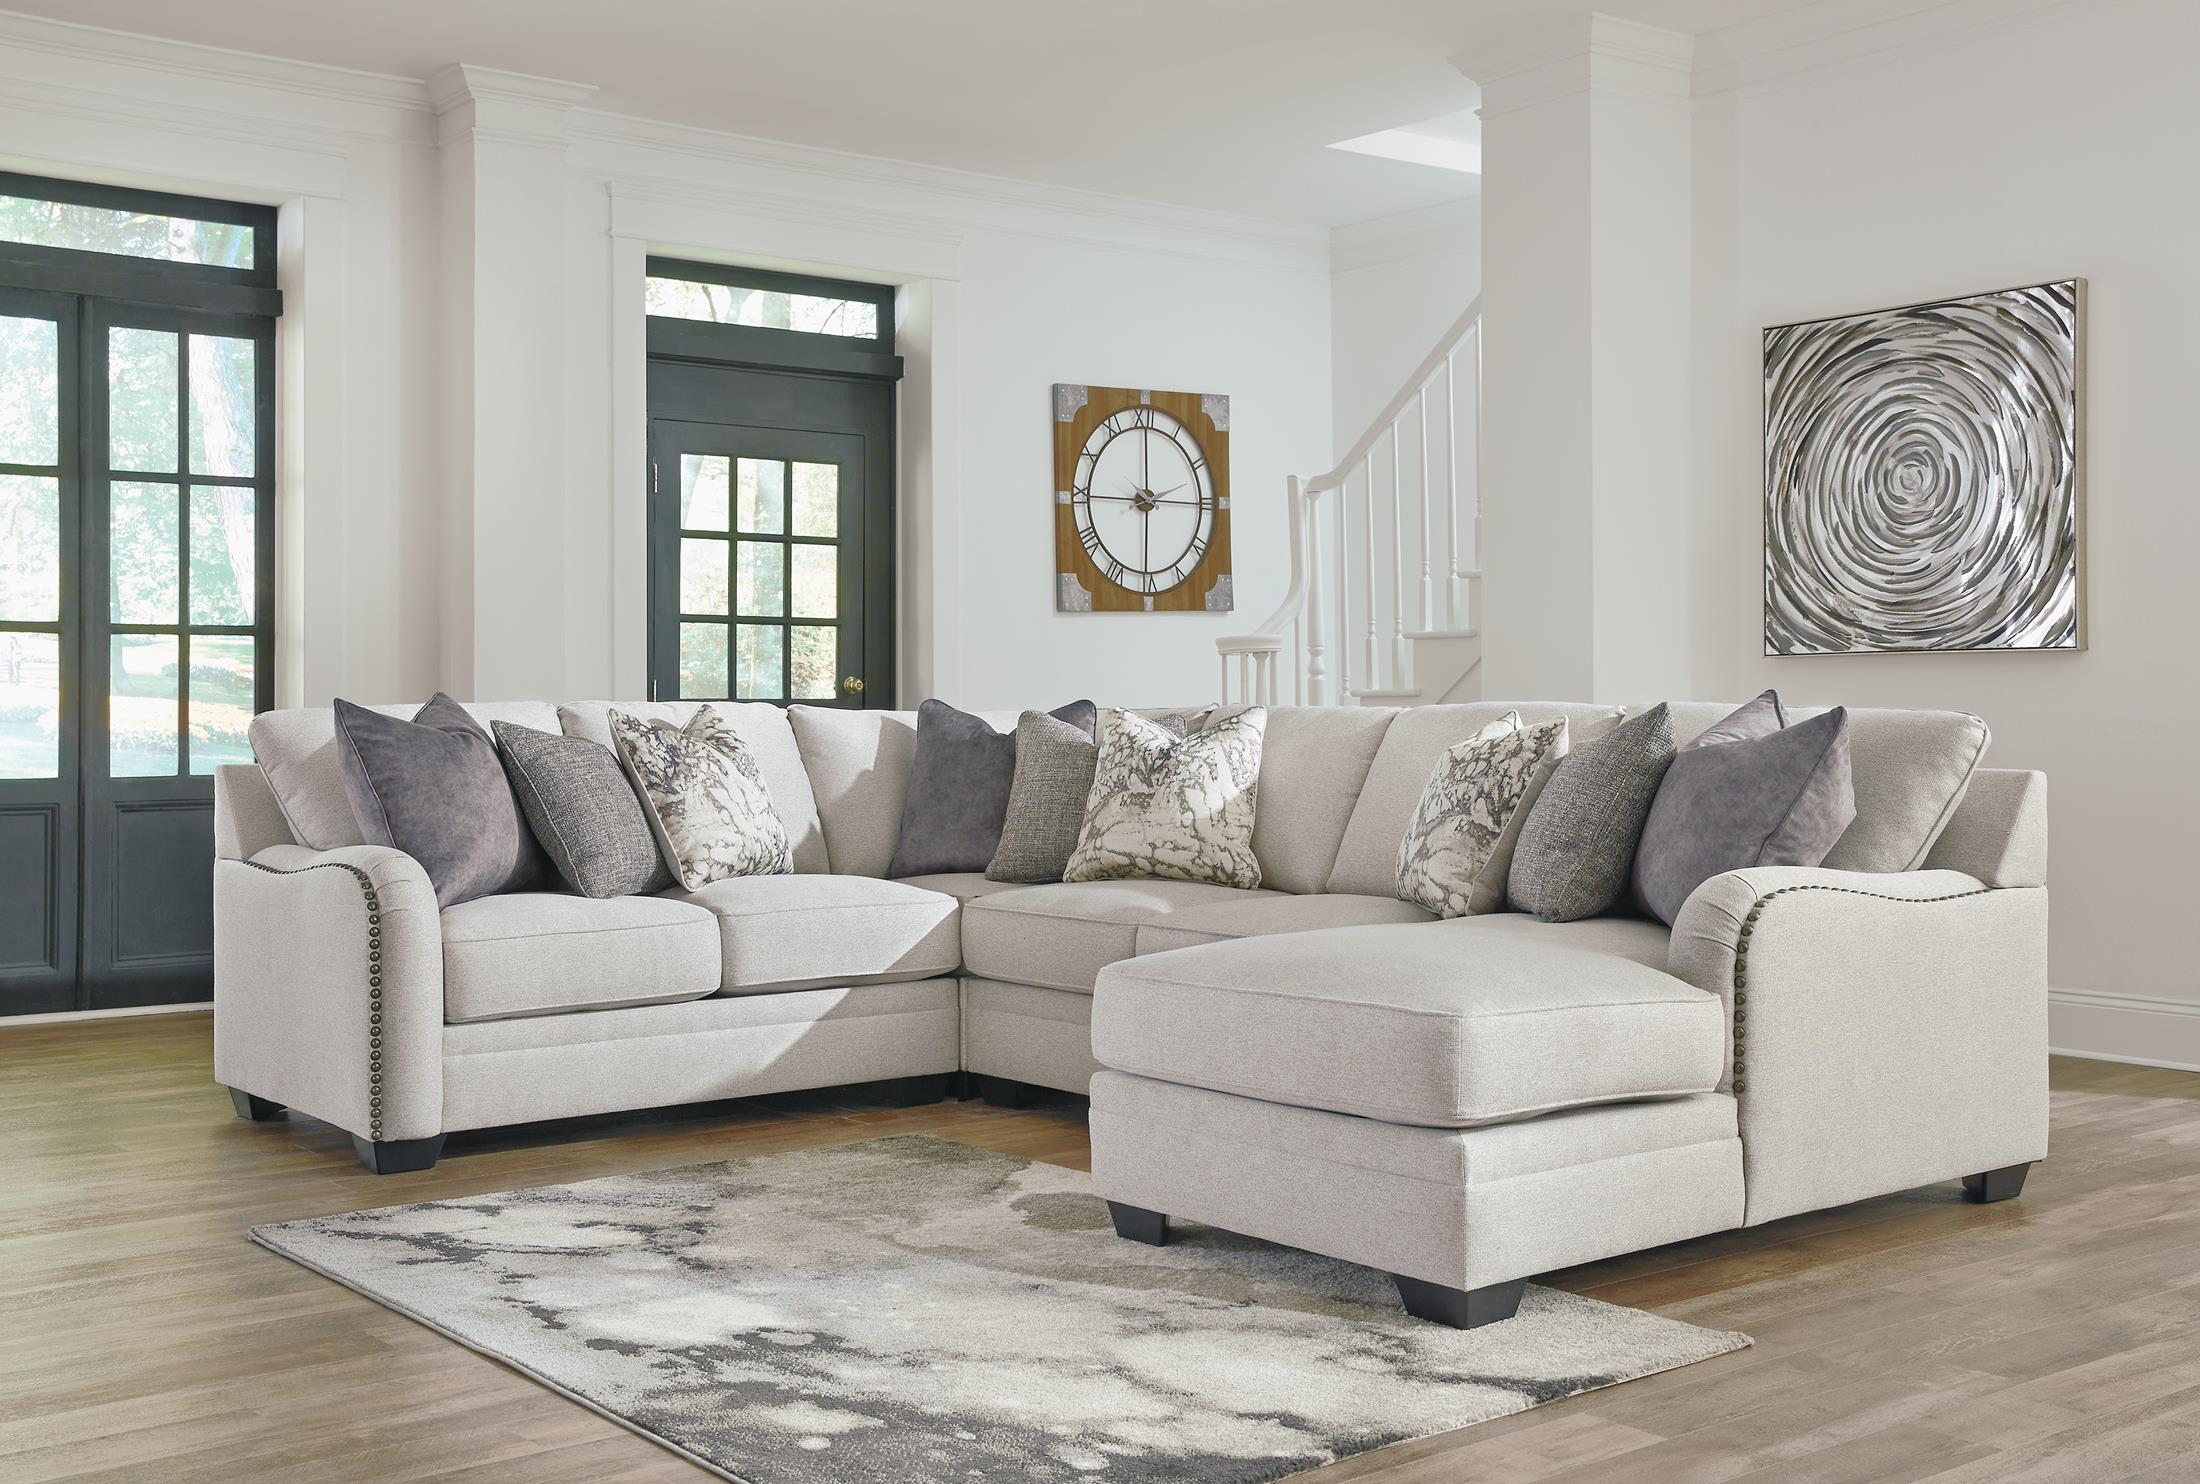 Dellara 4-Piece Sectional with Chaise - Right Facing